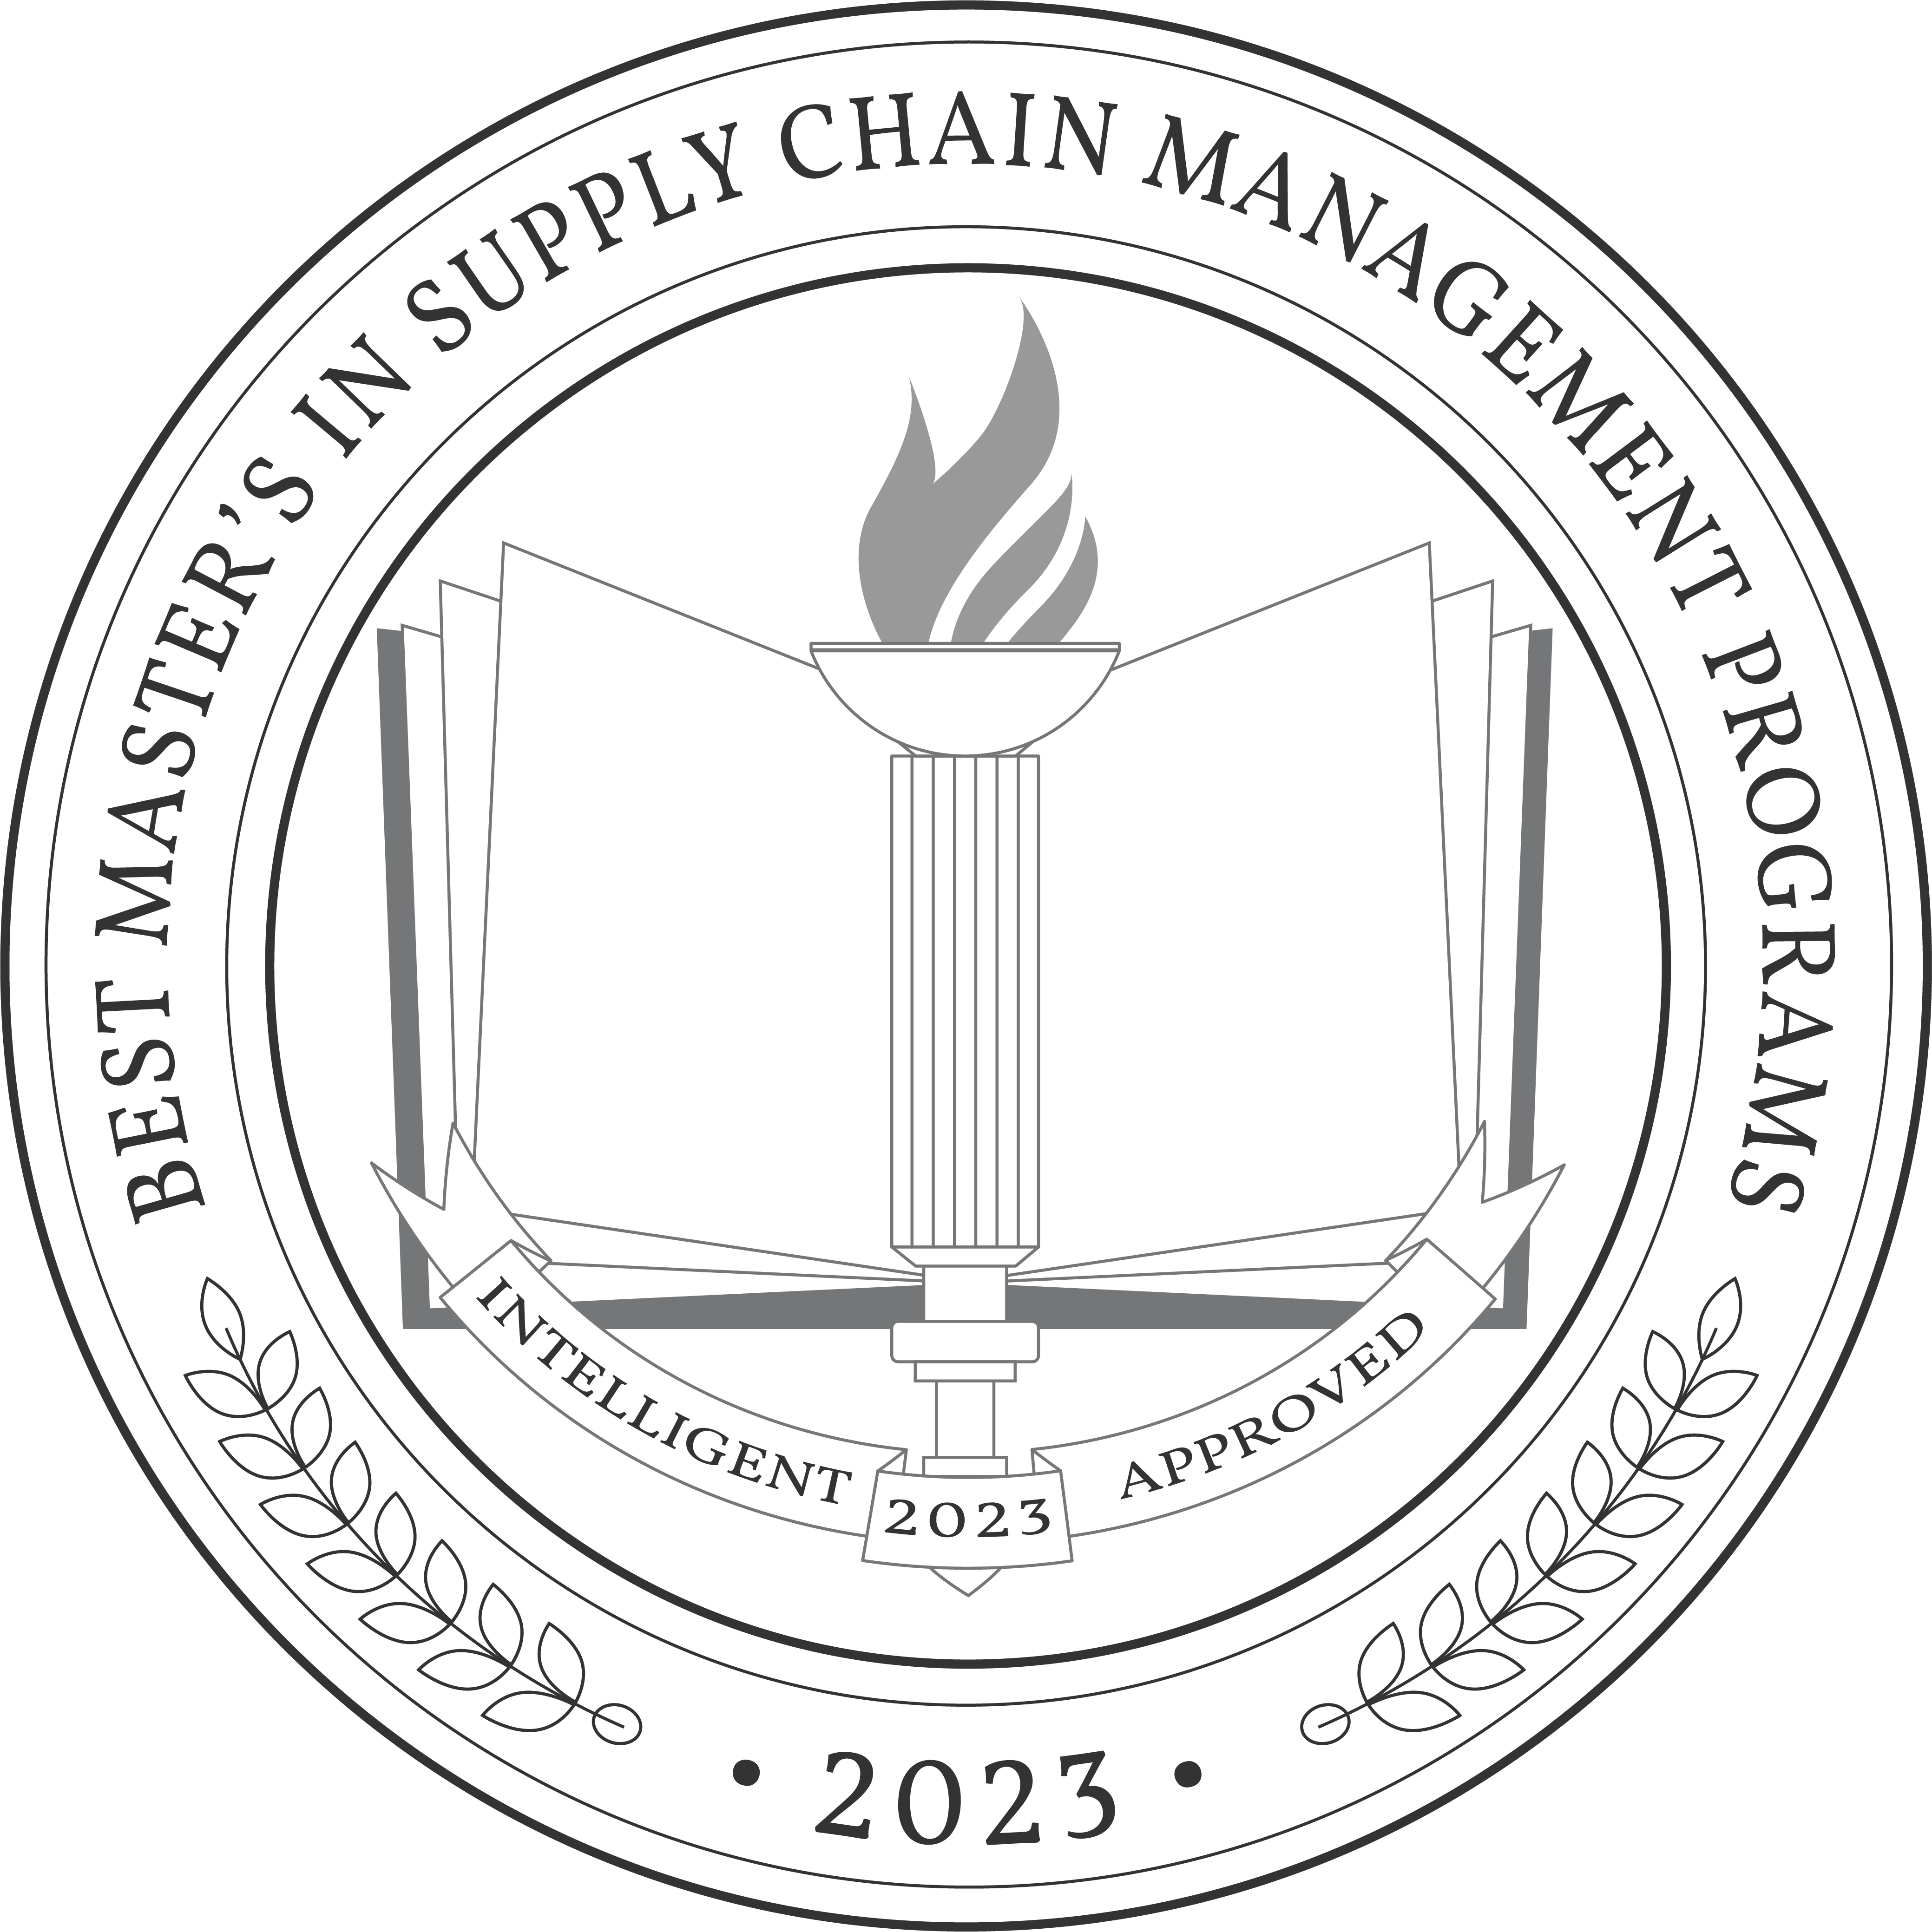 Best Master's in Supply Chain Management Degree Programs